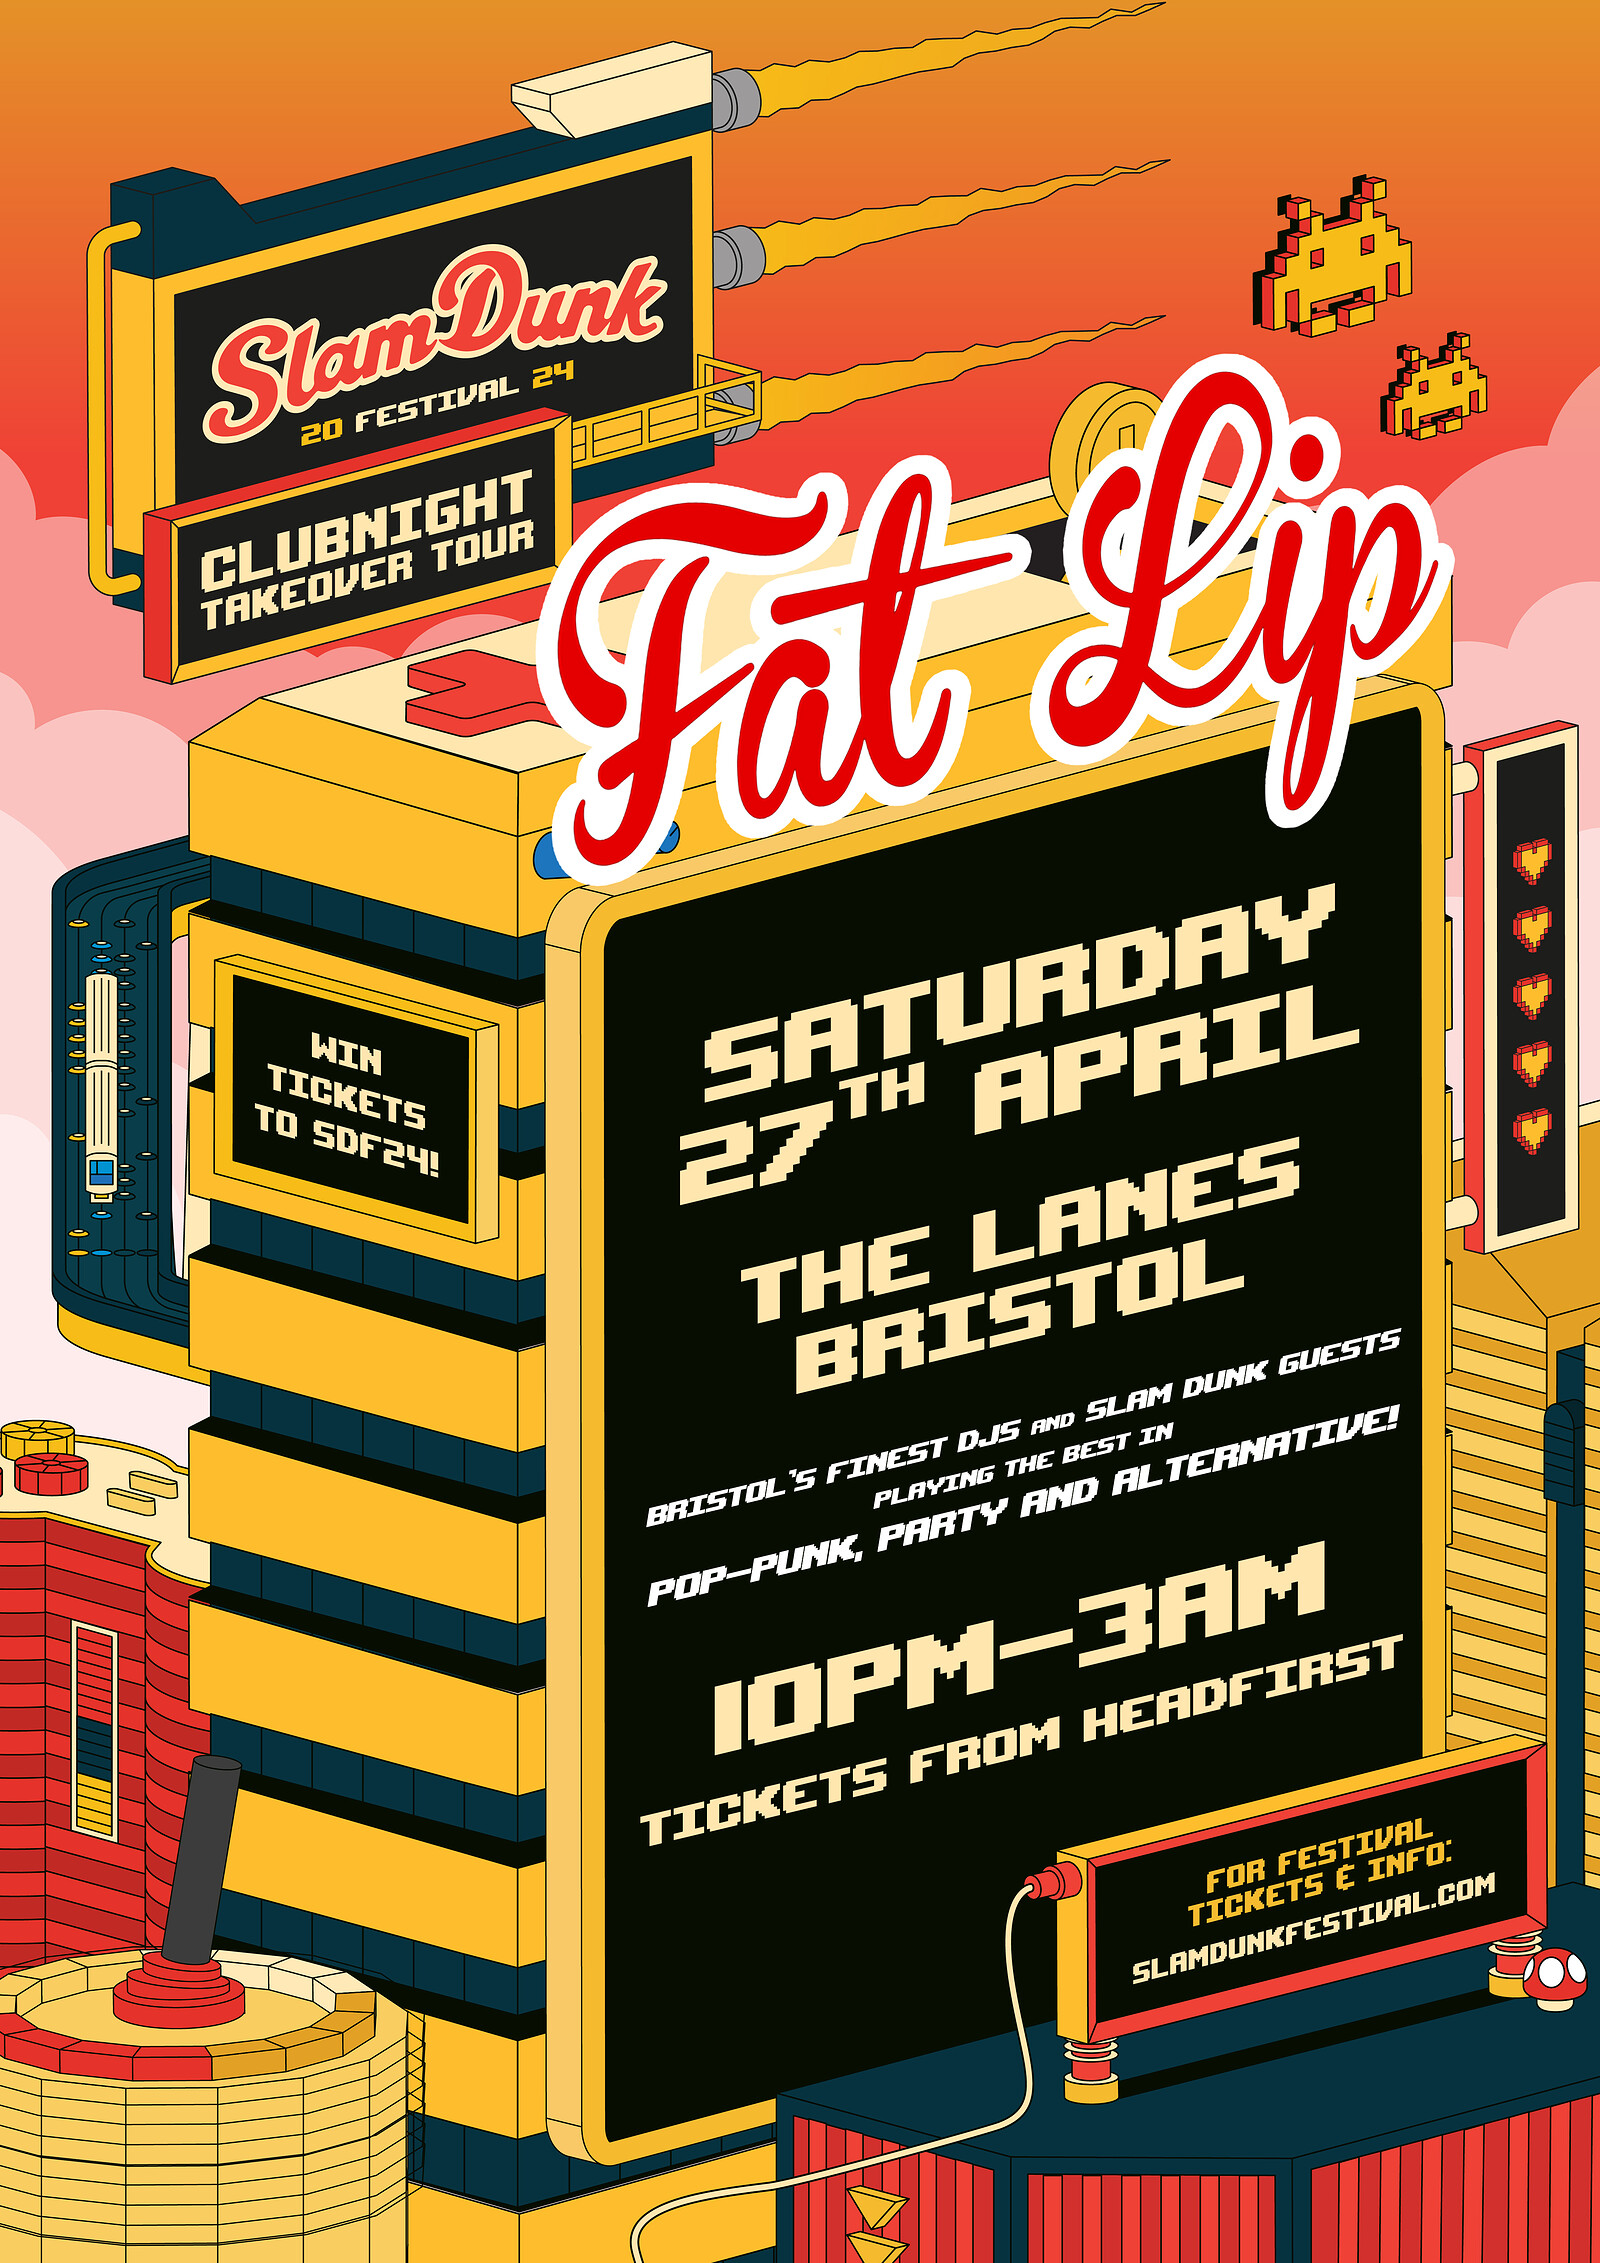 ★ FAT LIP ★ Slam Dunk Festival Takeover at The Lanes